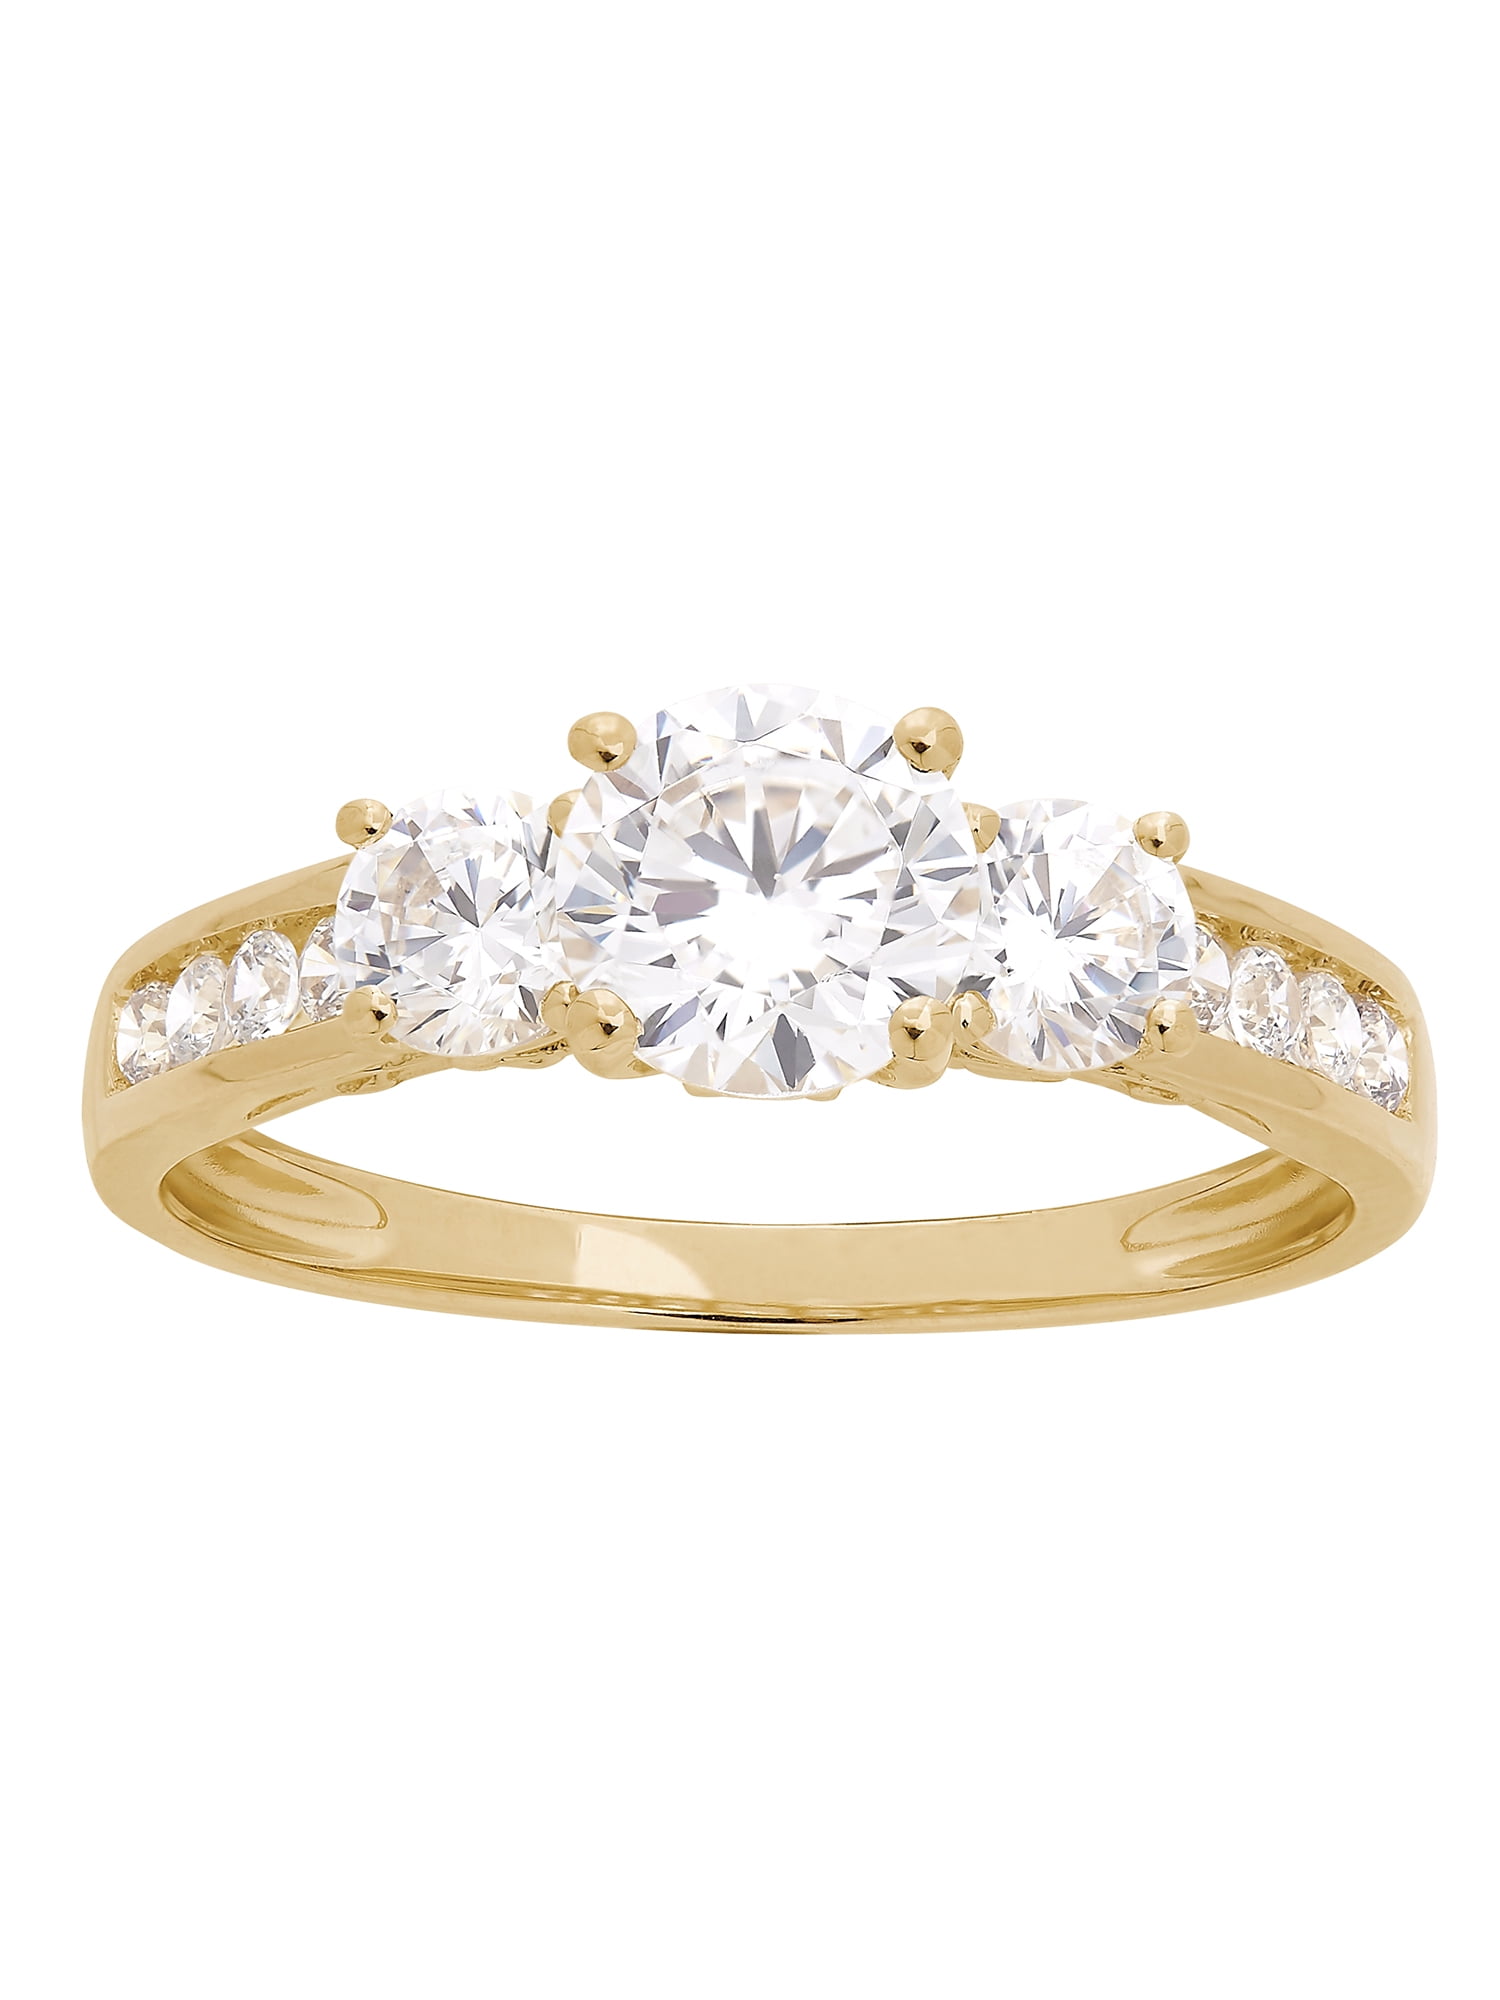 10KT Yellow Gold Round Shaped Cubic Zirconia Ring